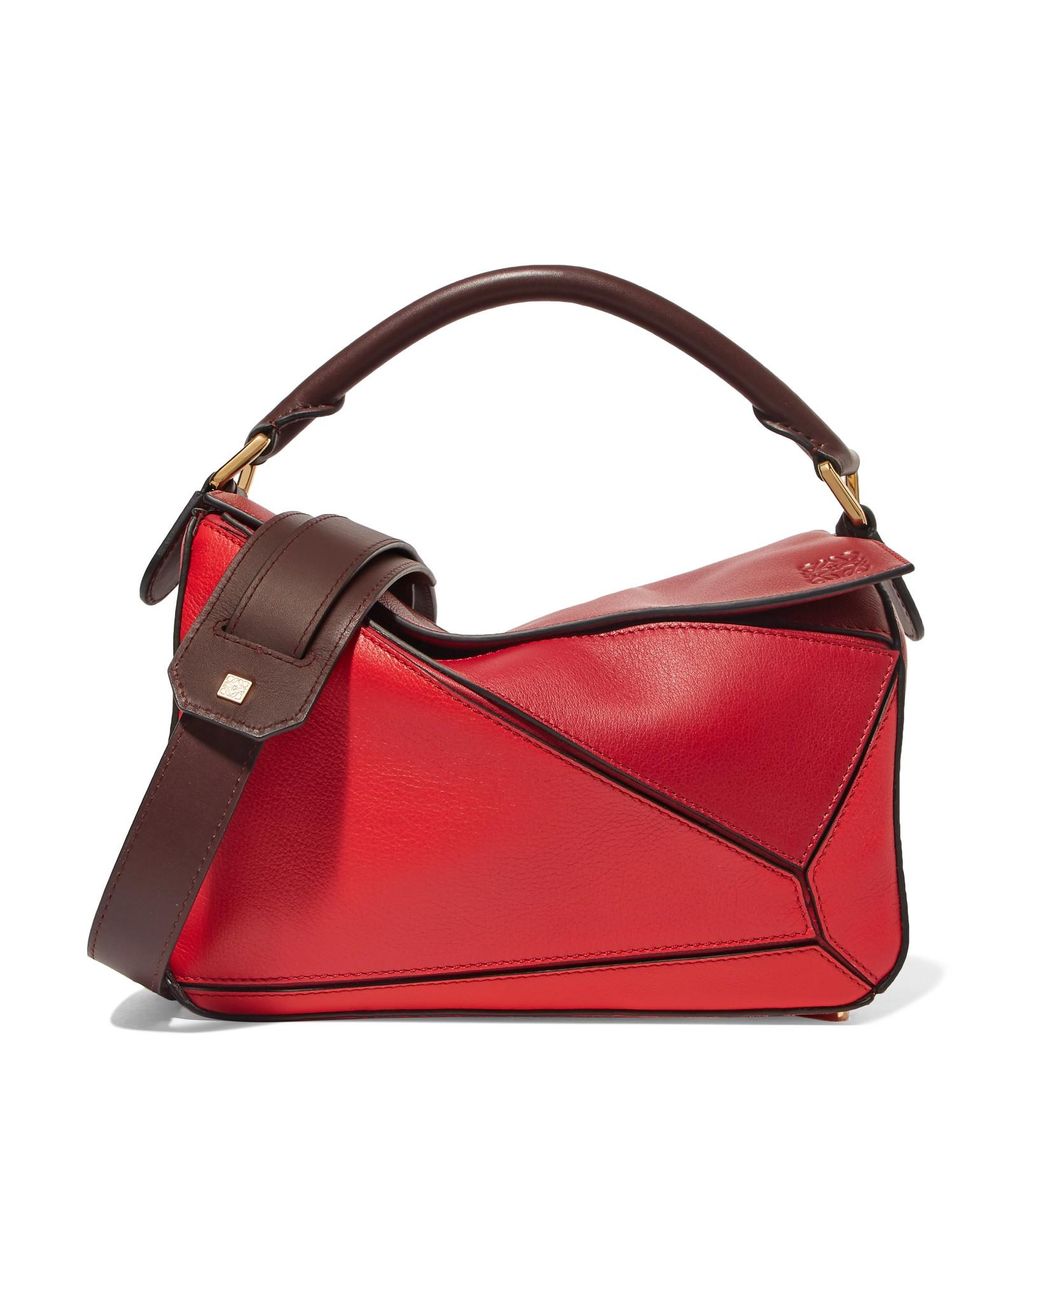 Authentic.Buy.Sell - New ! Loewe Puzzle Pochette Brick Red Almond Calf Ghw  with copy rec Nov/18 (25x6x17cm) adjustable shoulder strap ( bs sling,  short strap & clutch) @16.9 jt